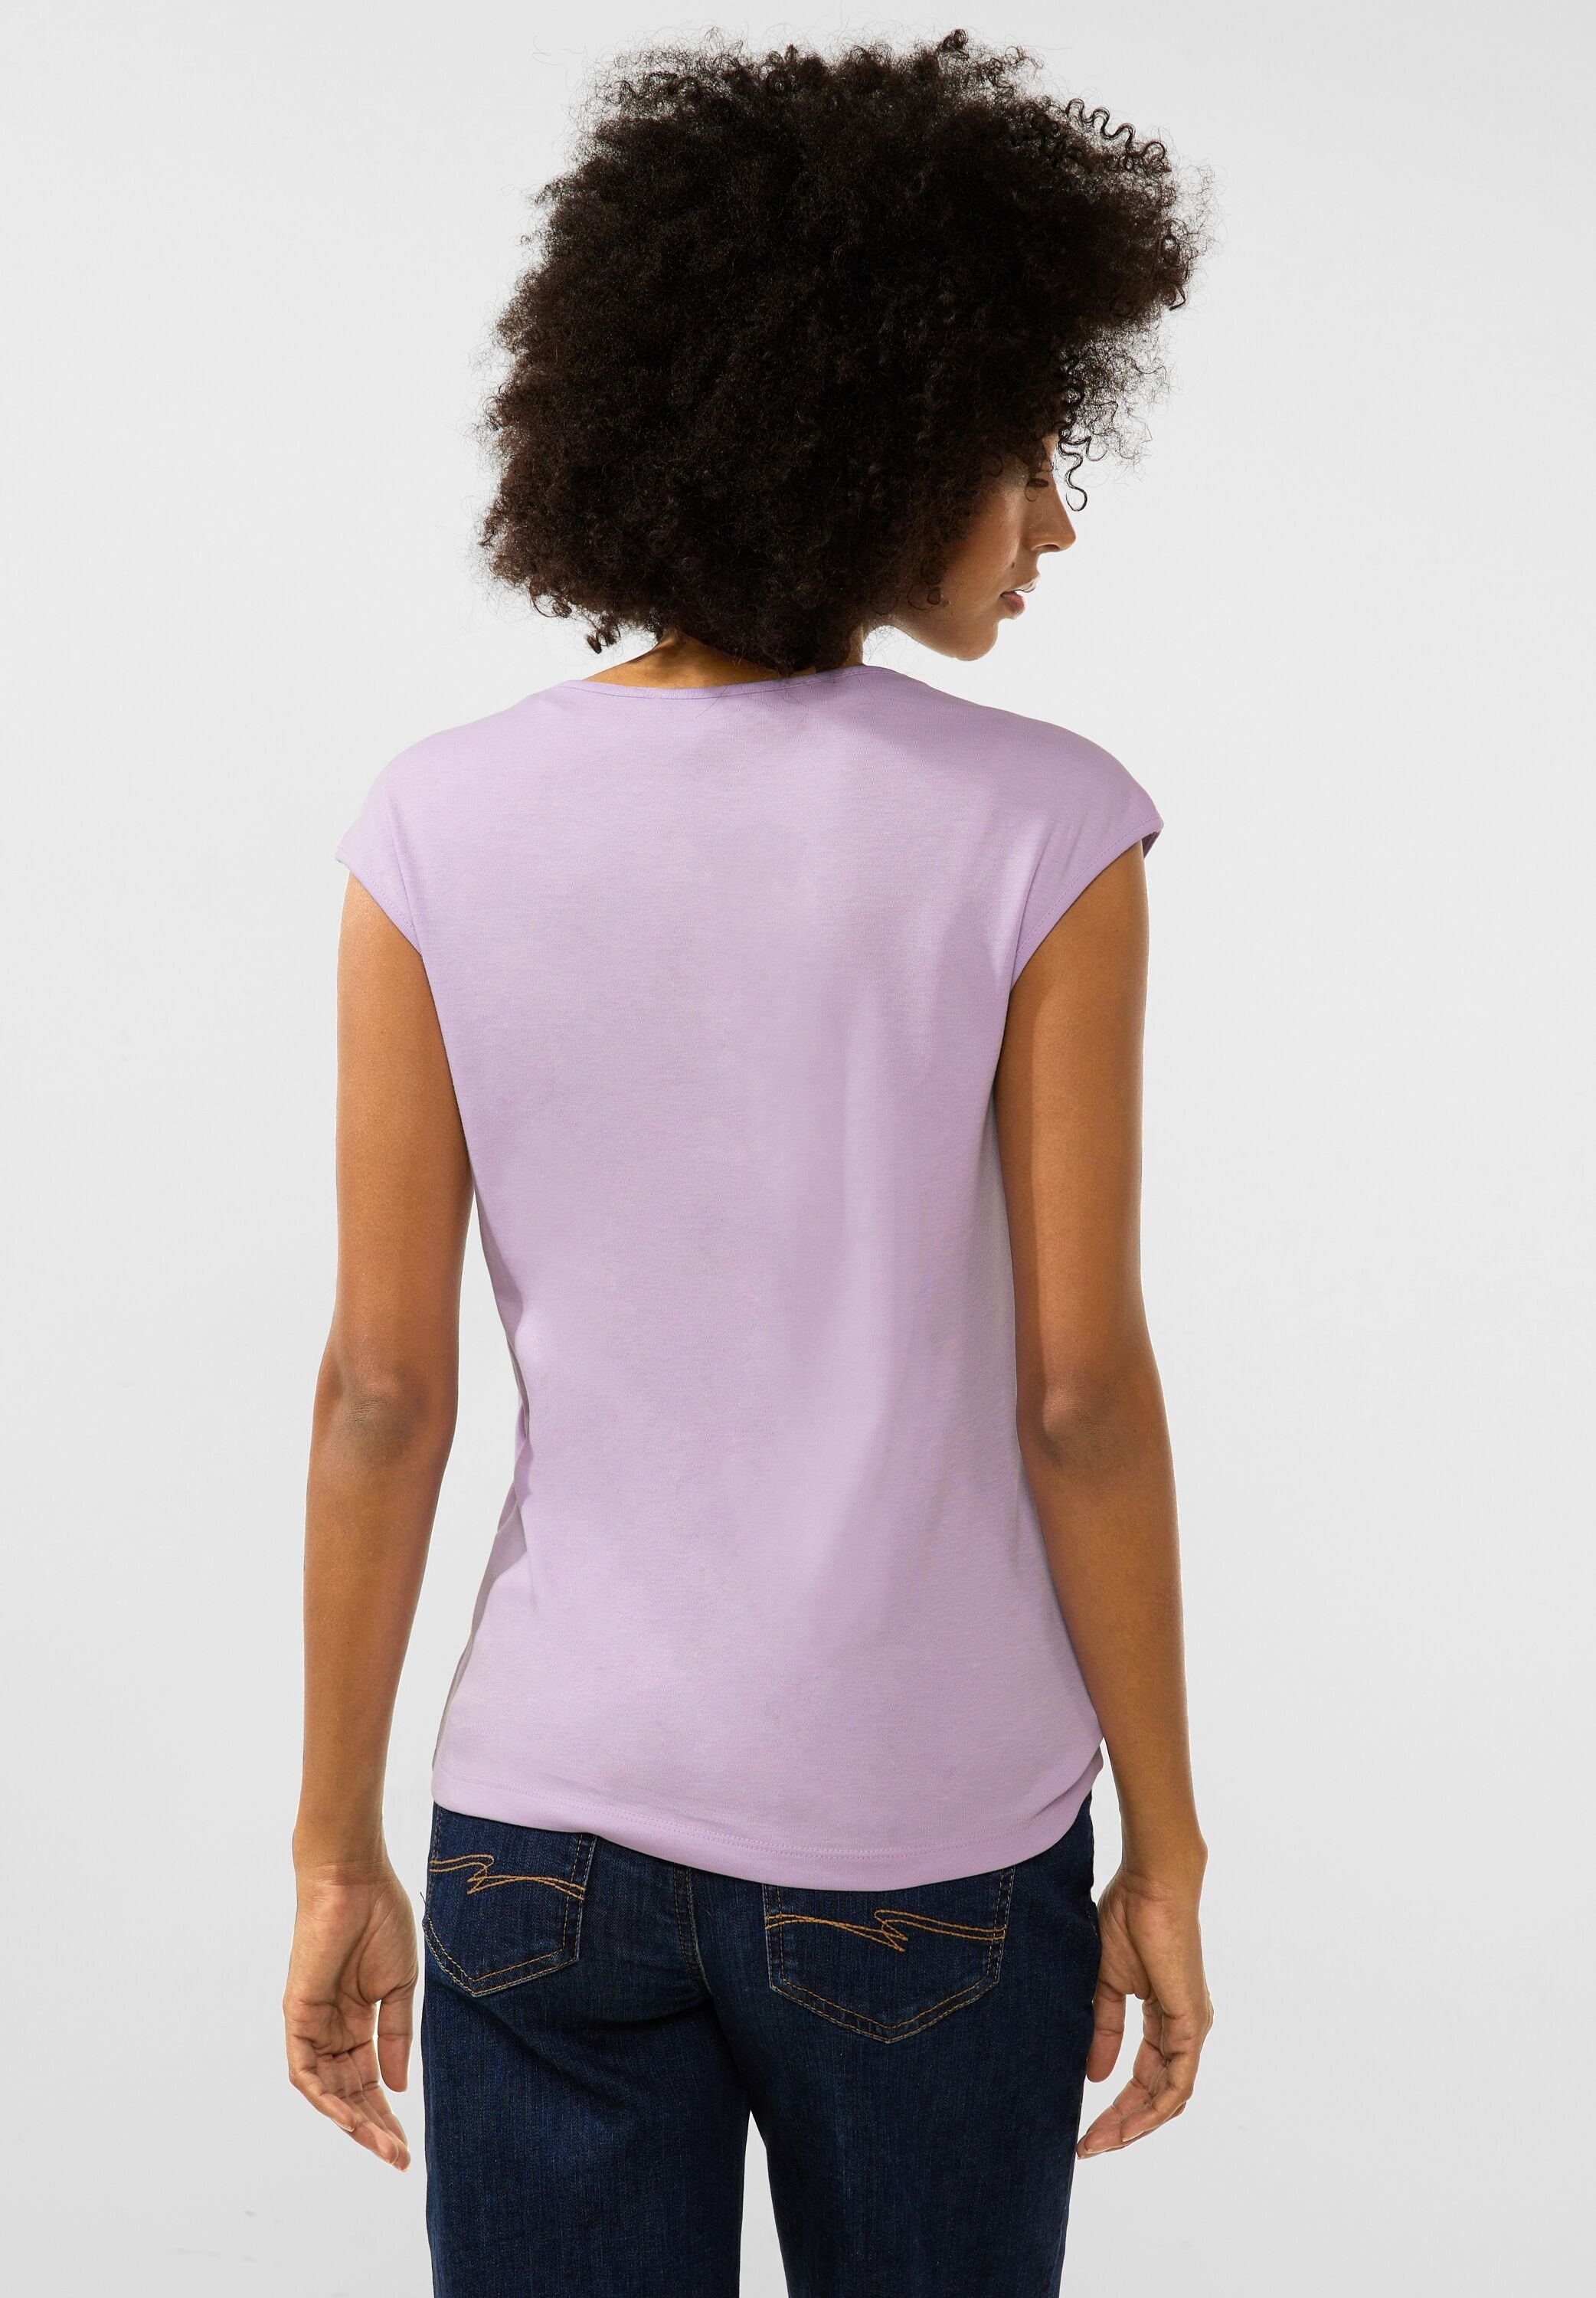 Unifarbe soft T-Shirt lilac ONE in STREET pure